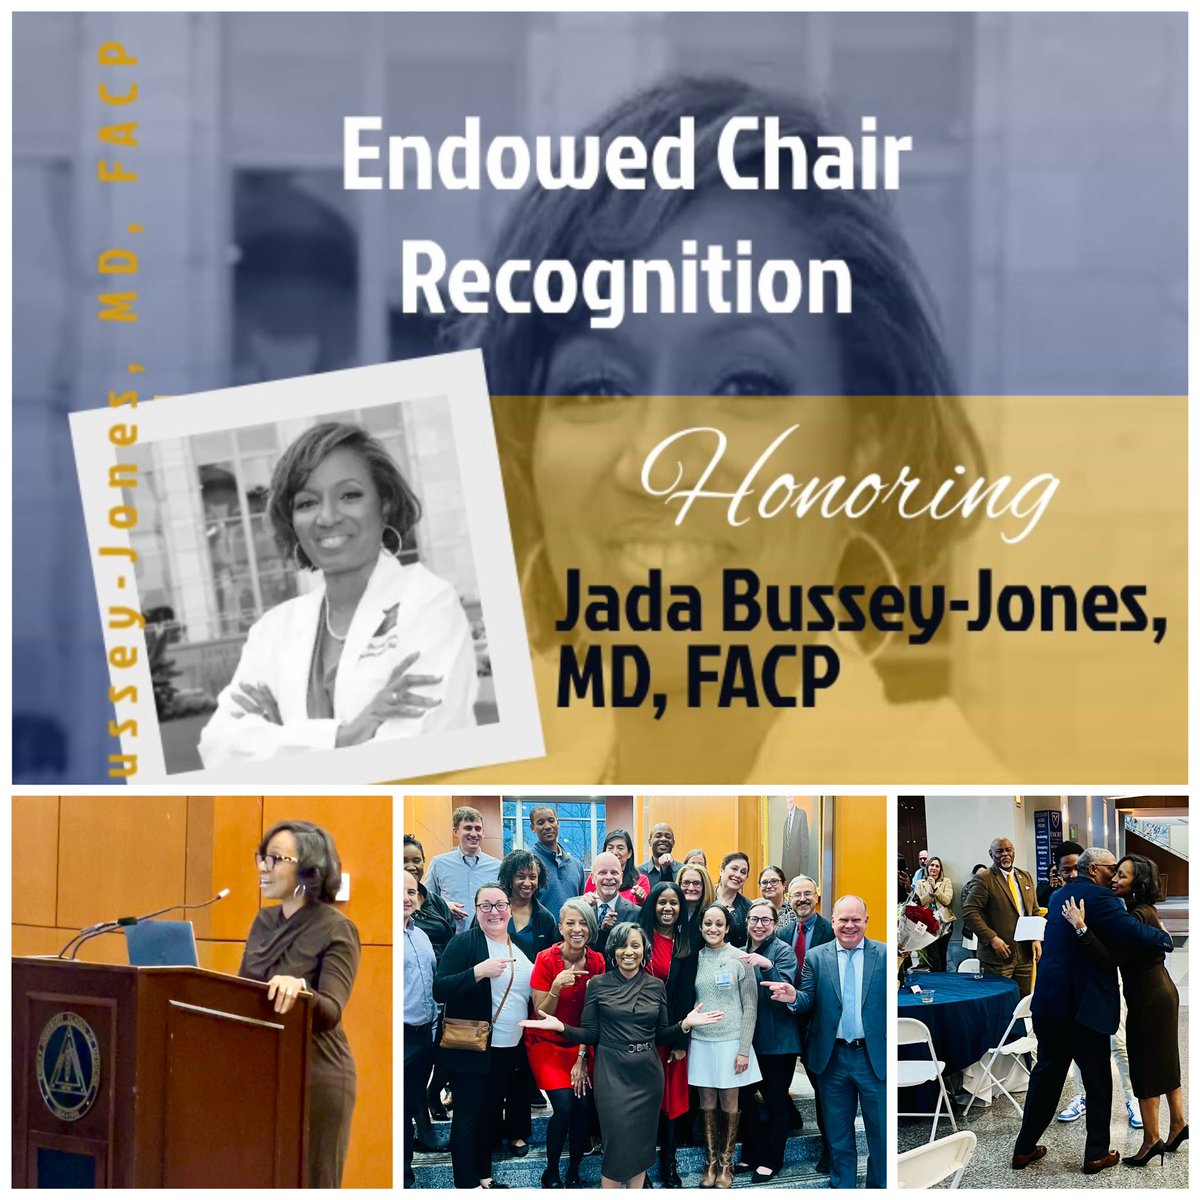 You are more likely to witness a total eclipse of the sun in your lifetime than a Black woman receiving an endowed chair at a US medical school. But yesterday, we did. Congratulations to my mentor @BusseyJada, the new Carter Smith Sr. Endowed Chair. So deserved! #biggerthanus